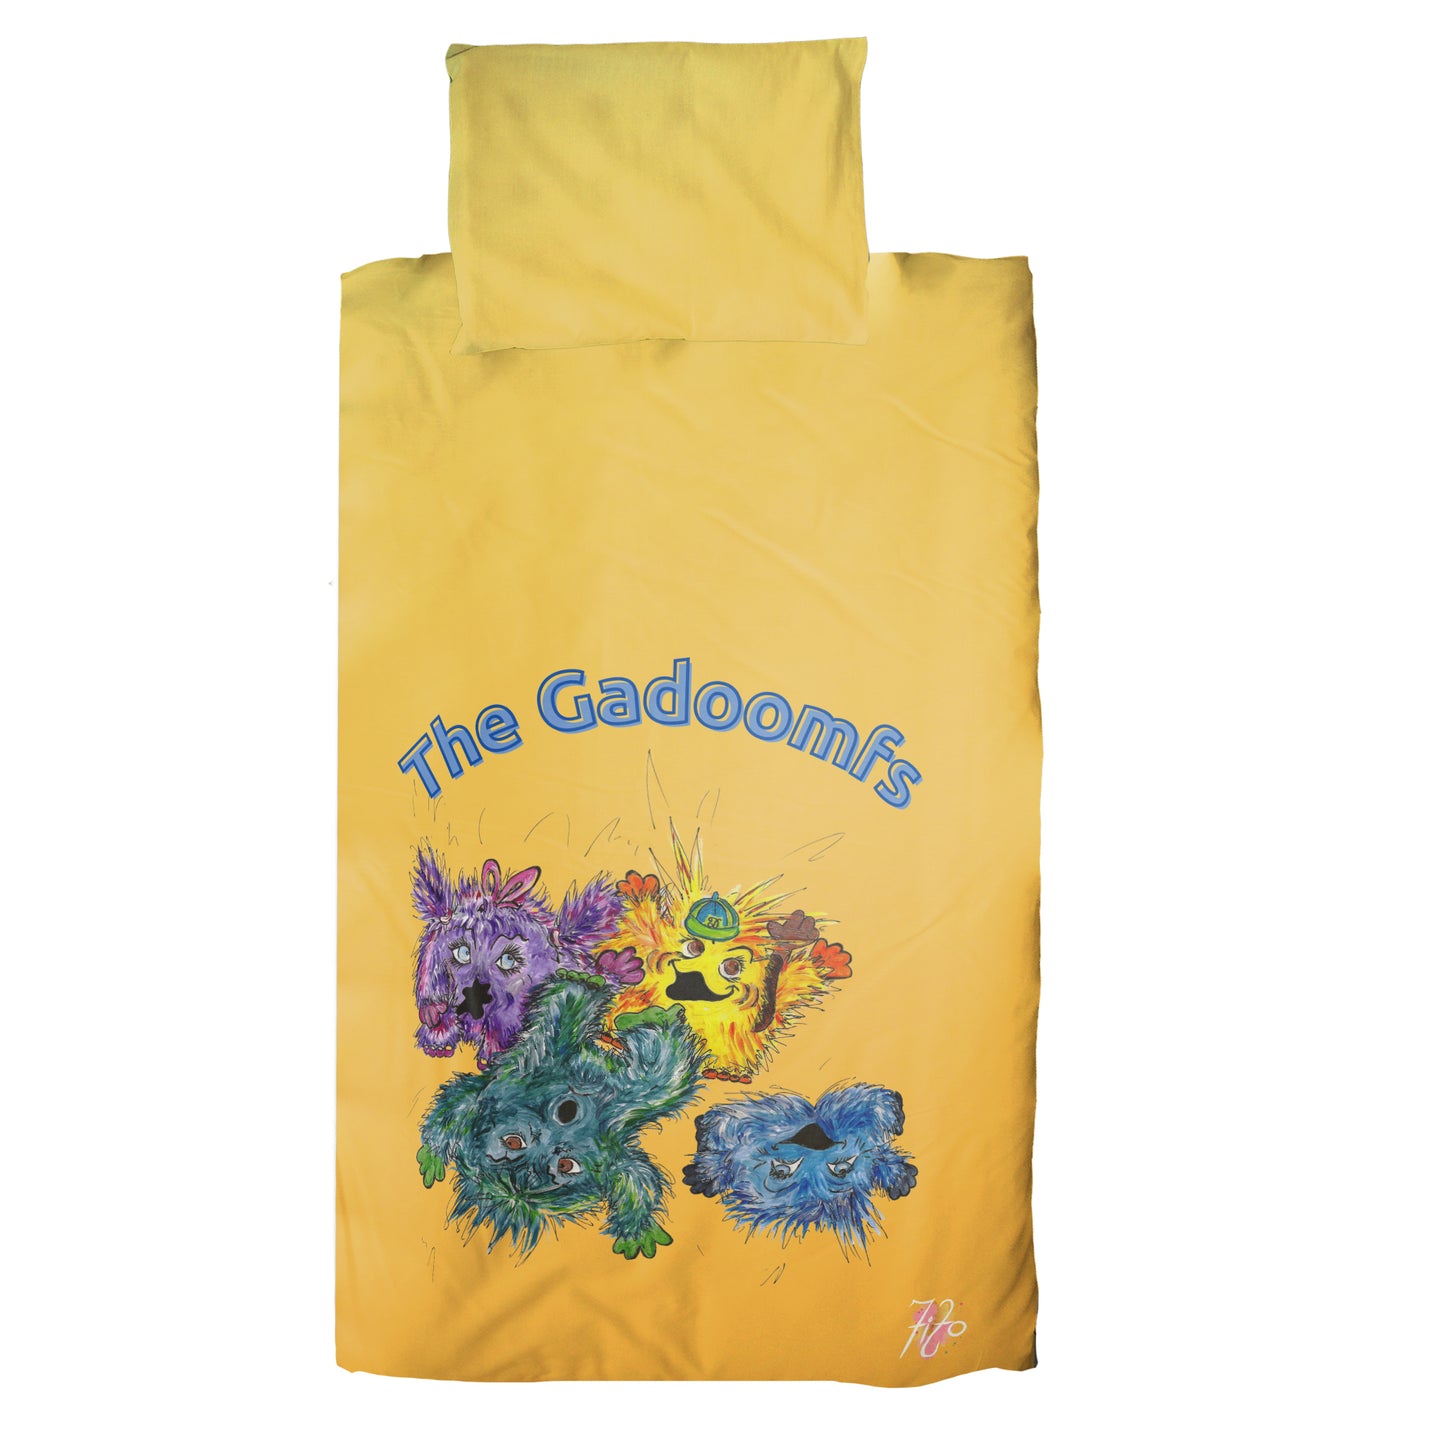 Gadoomfs on Yellow Cot Duvet Set By Fifo